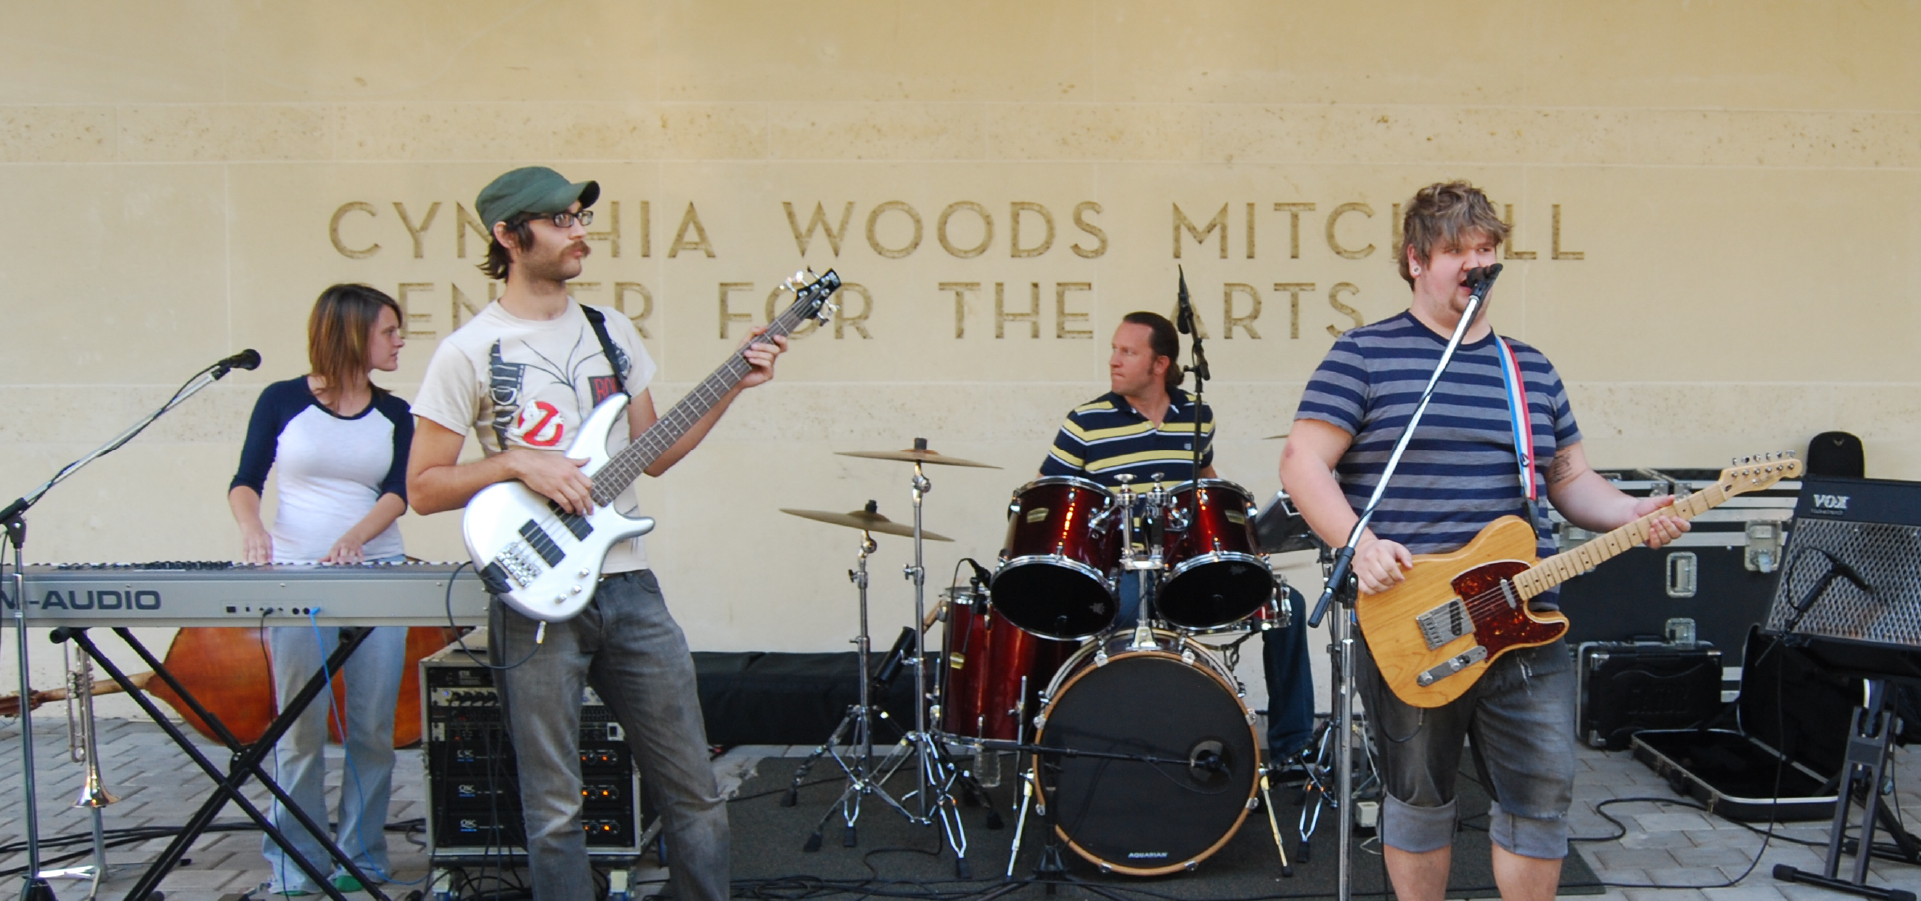 A rock band plays in front of the Cynthia Moods Mitchell Center for the Arts building signage, two people play guitar, one plays they keyboard and the other plays the drums with sound equipment behind them.